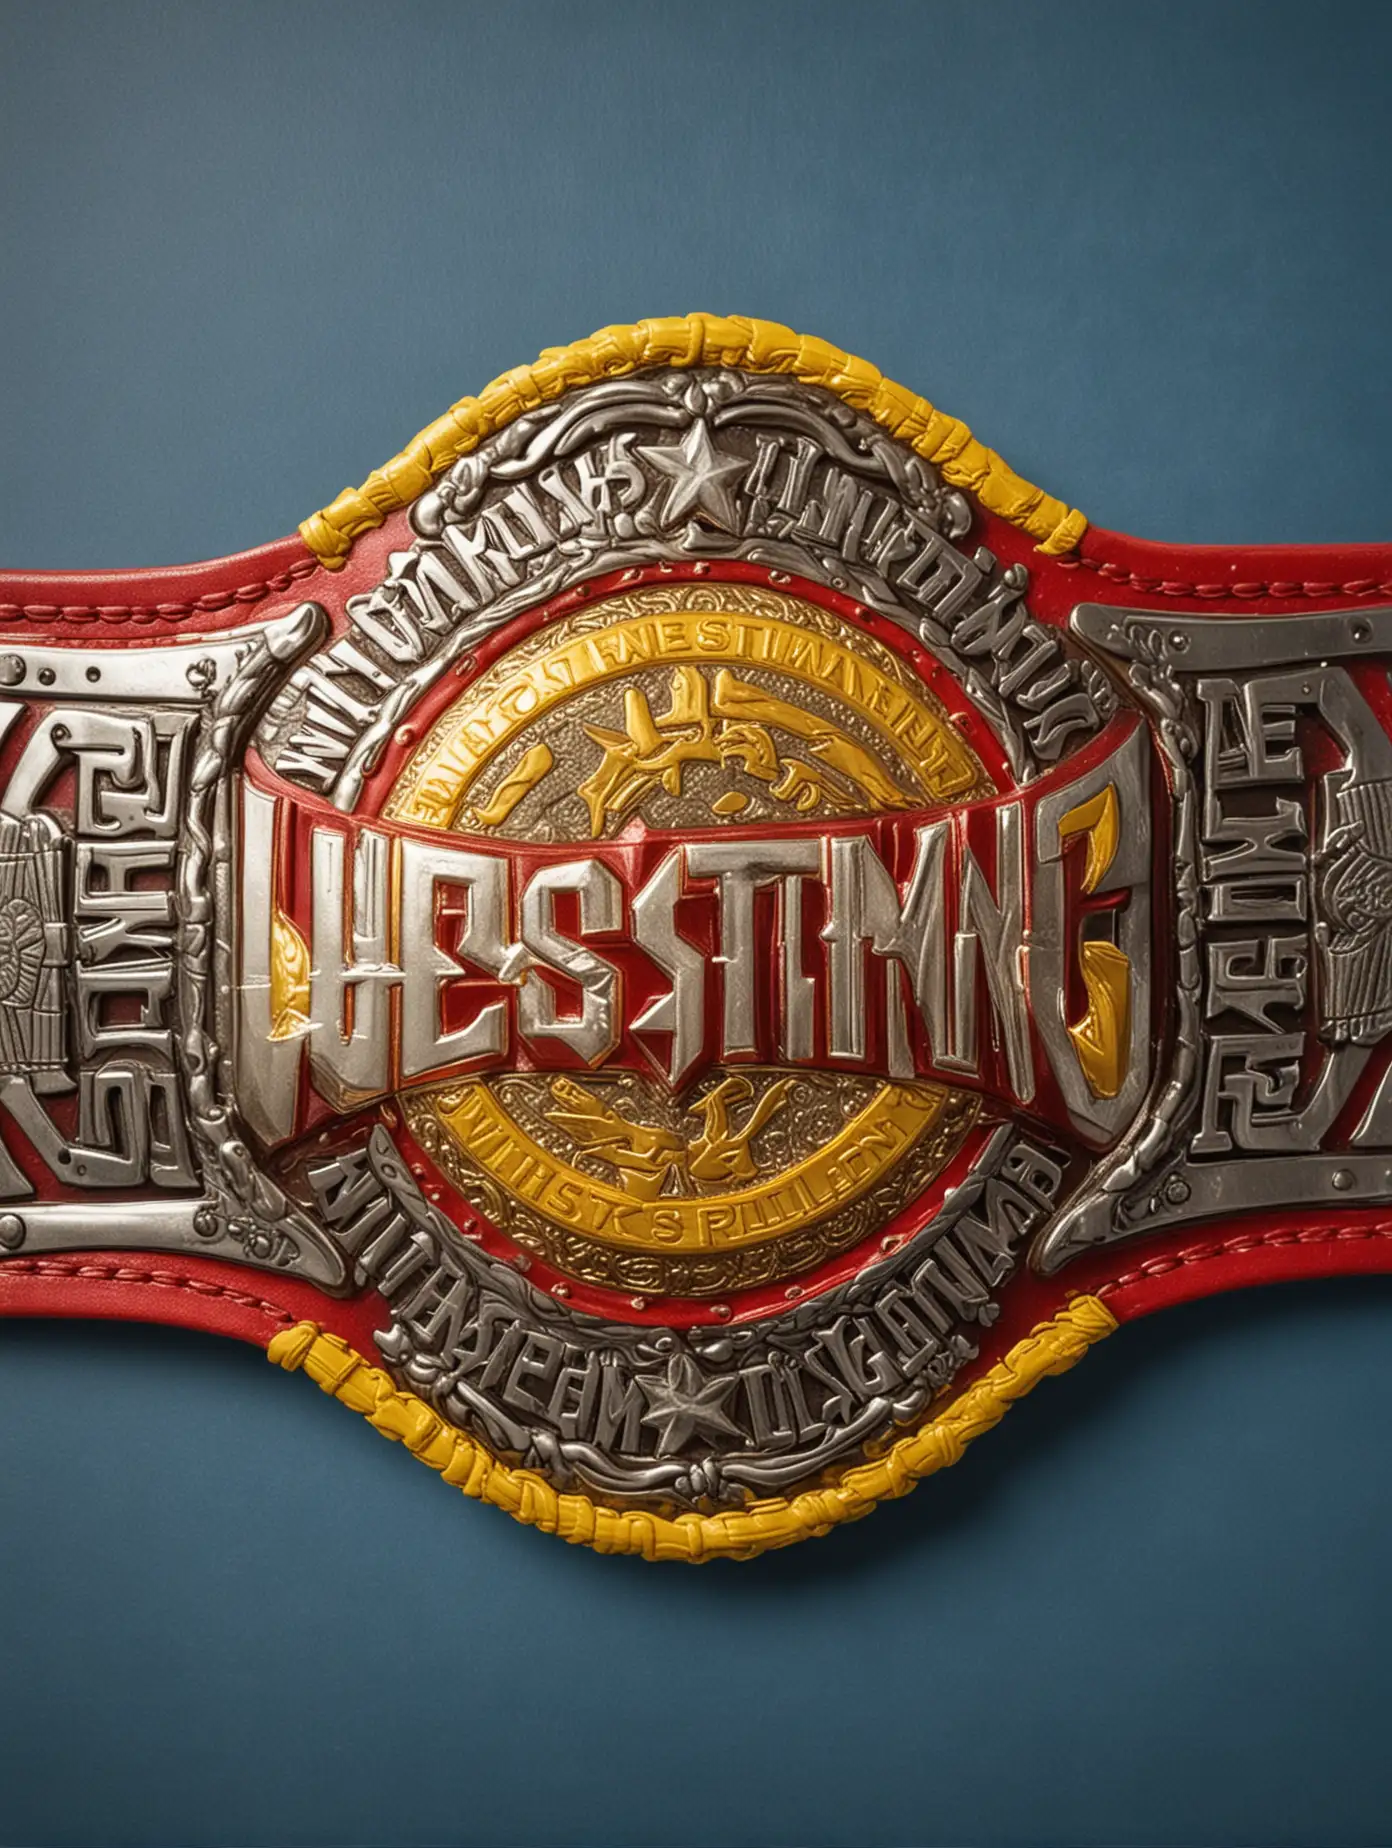 red and yellow wrestling champion Belt on blue background
